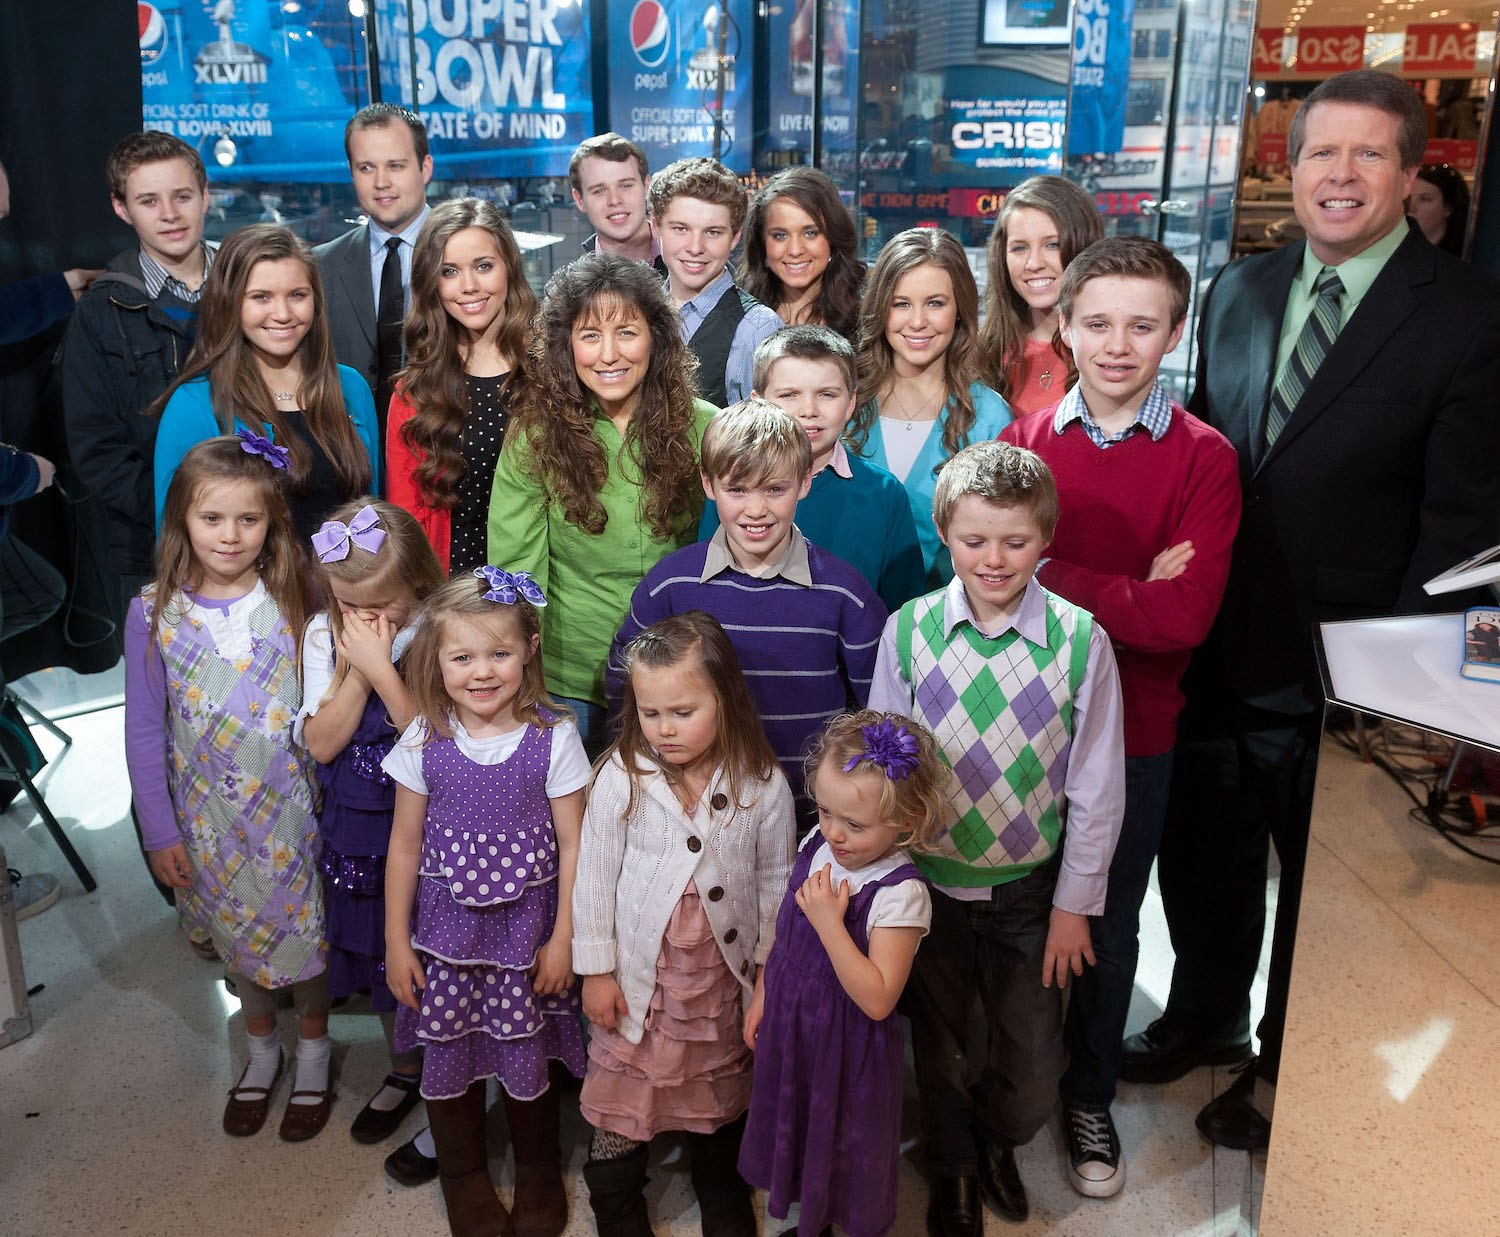 The Duggar family, including Jim Bob and Michelle Duggar, standing together and smiling